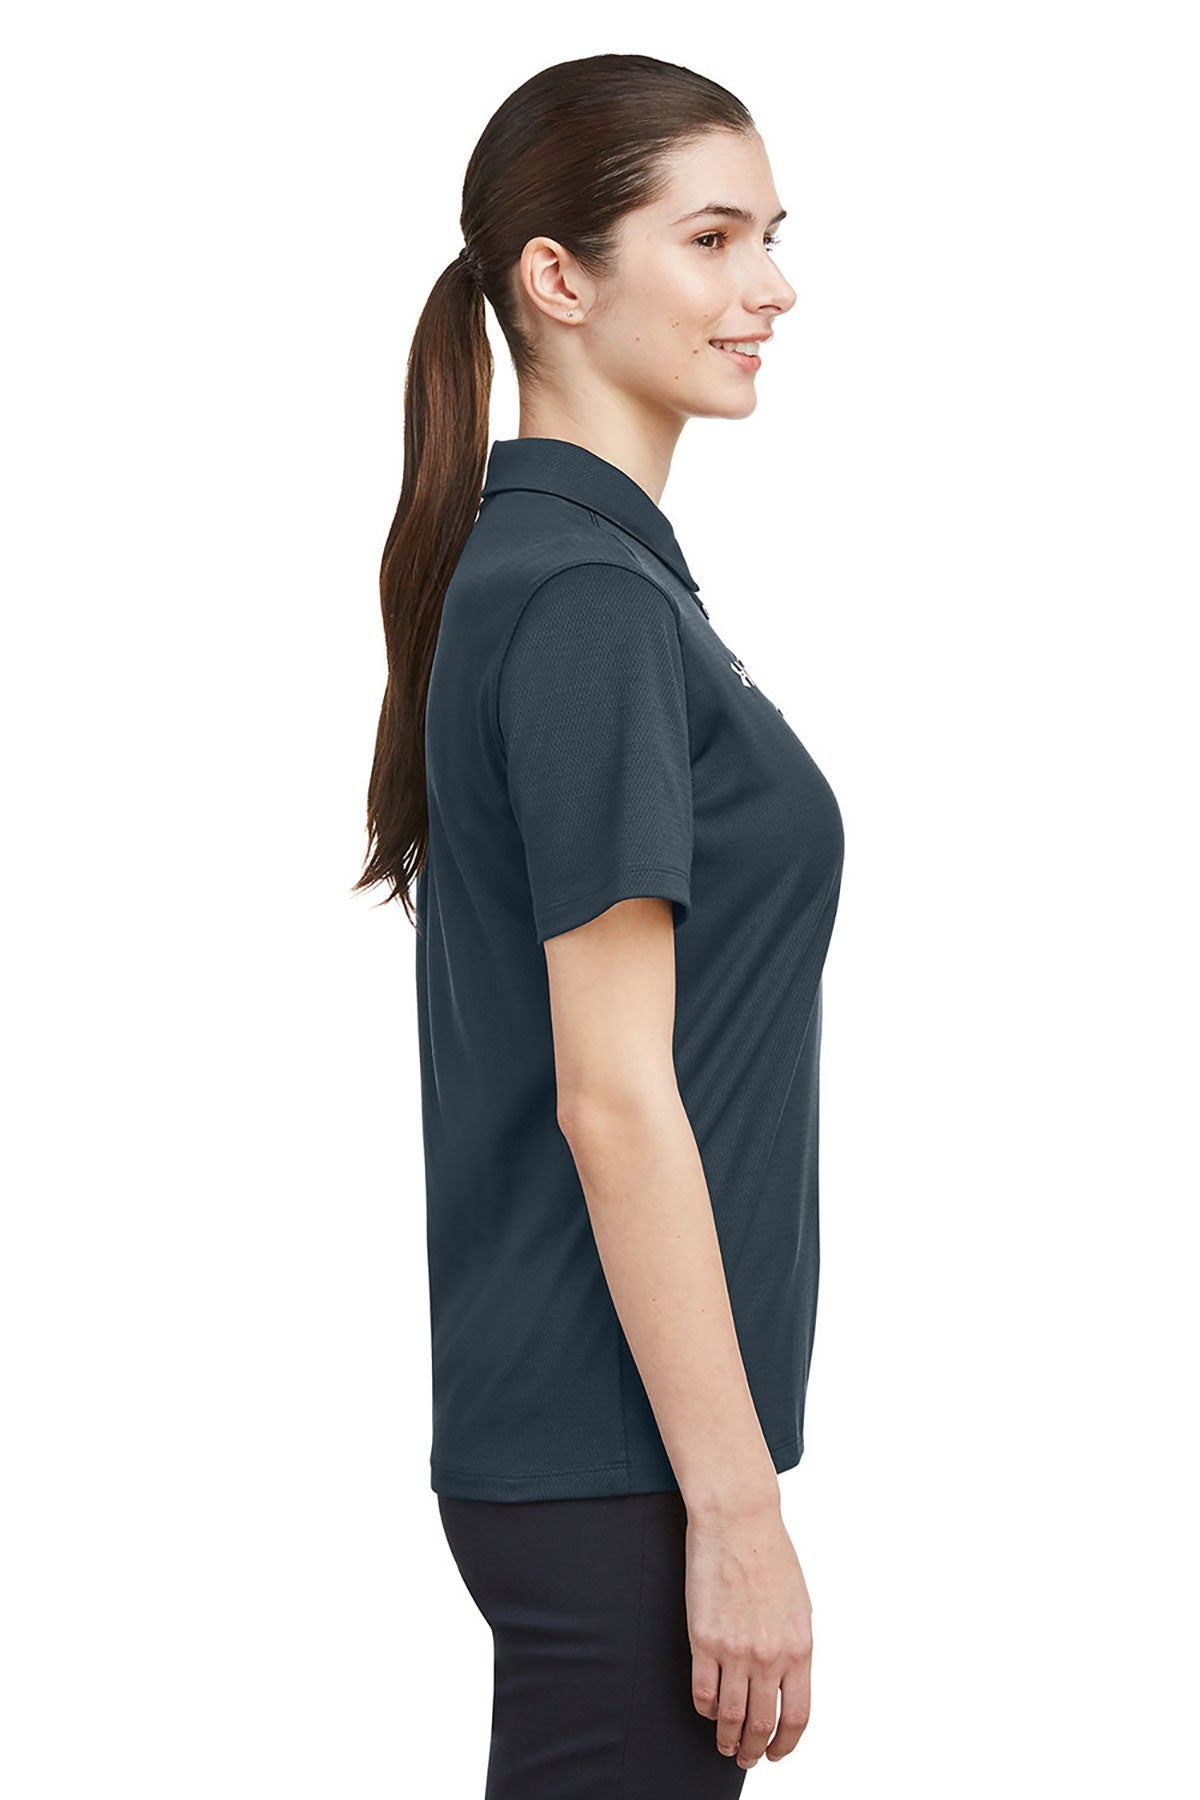 Under Armour Ladies Tech Polo, Stealth Grey [GuidePoint Security]